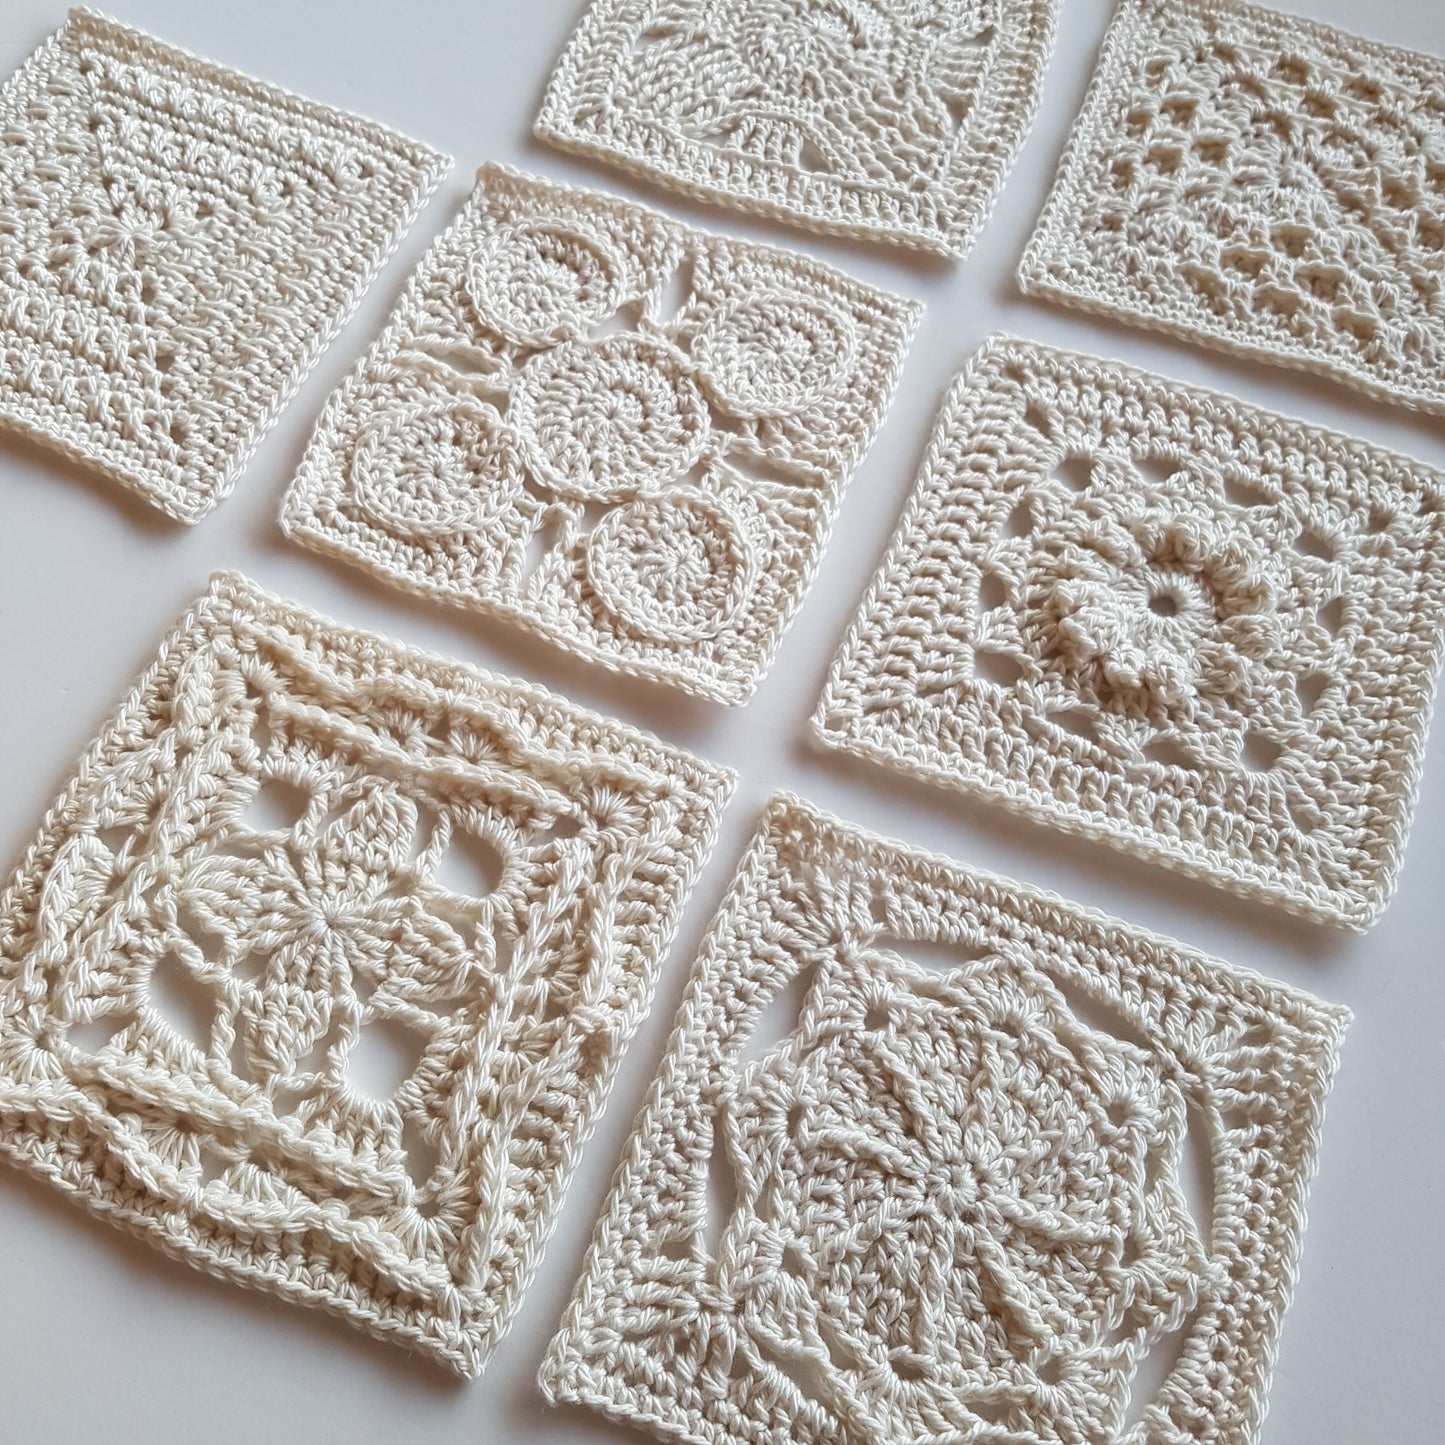 Cream granny squares from Granny Square Flair by Shelley Husband